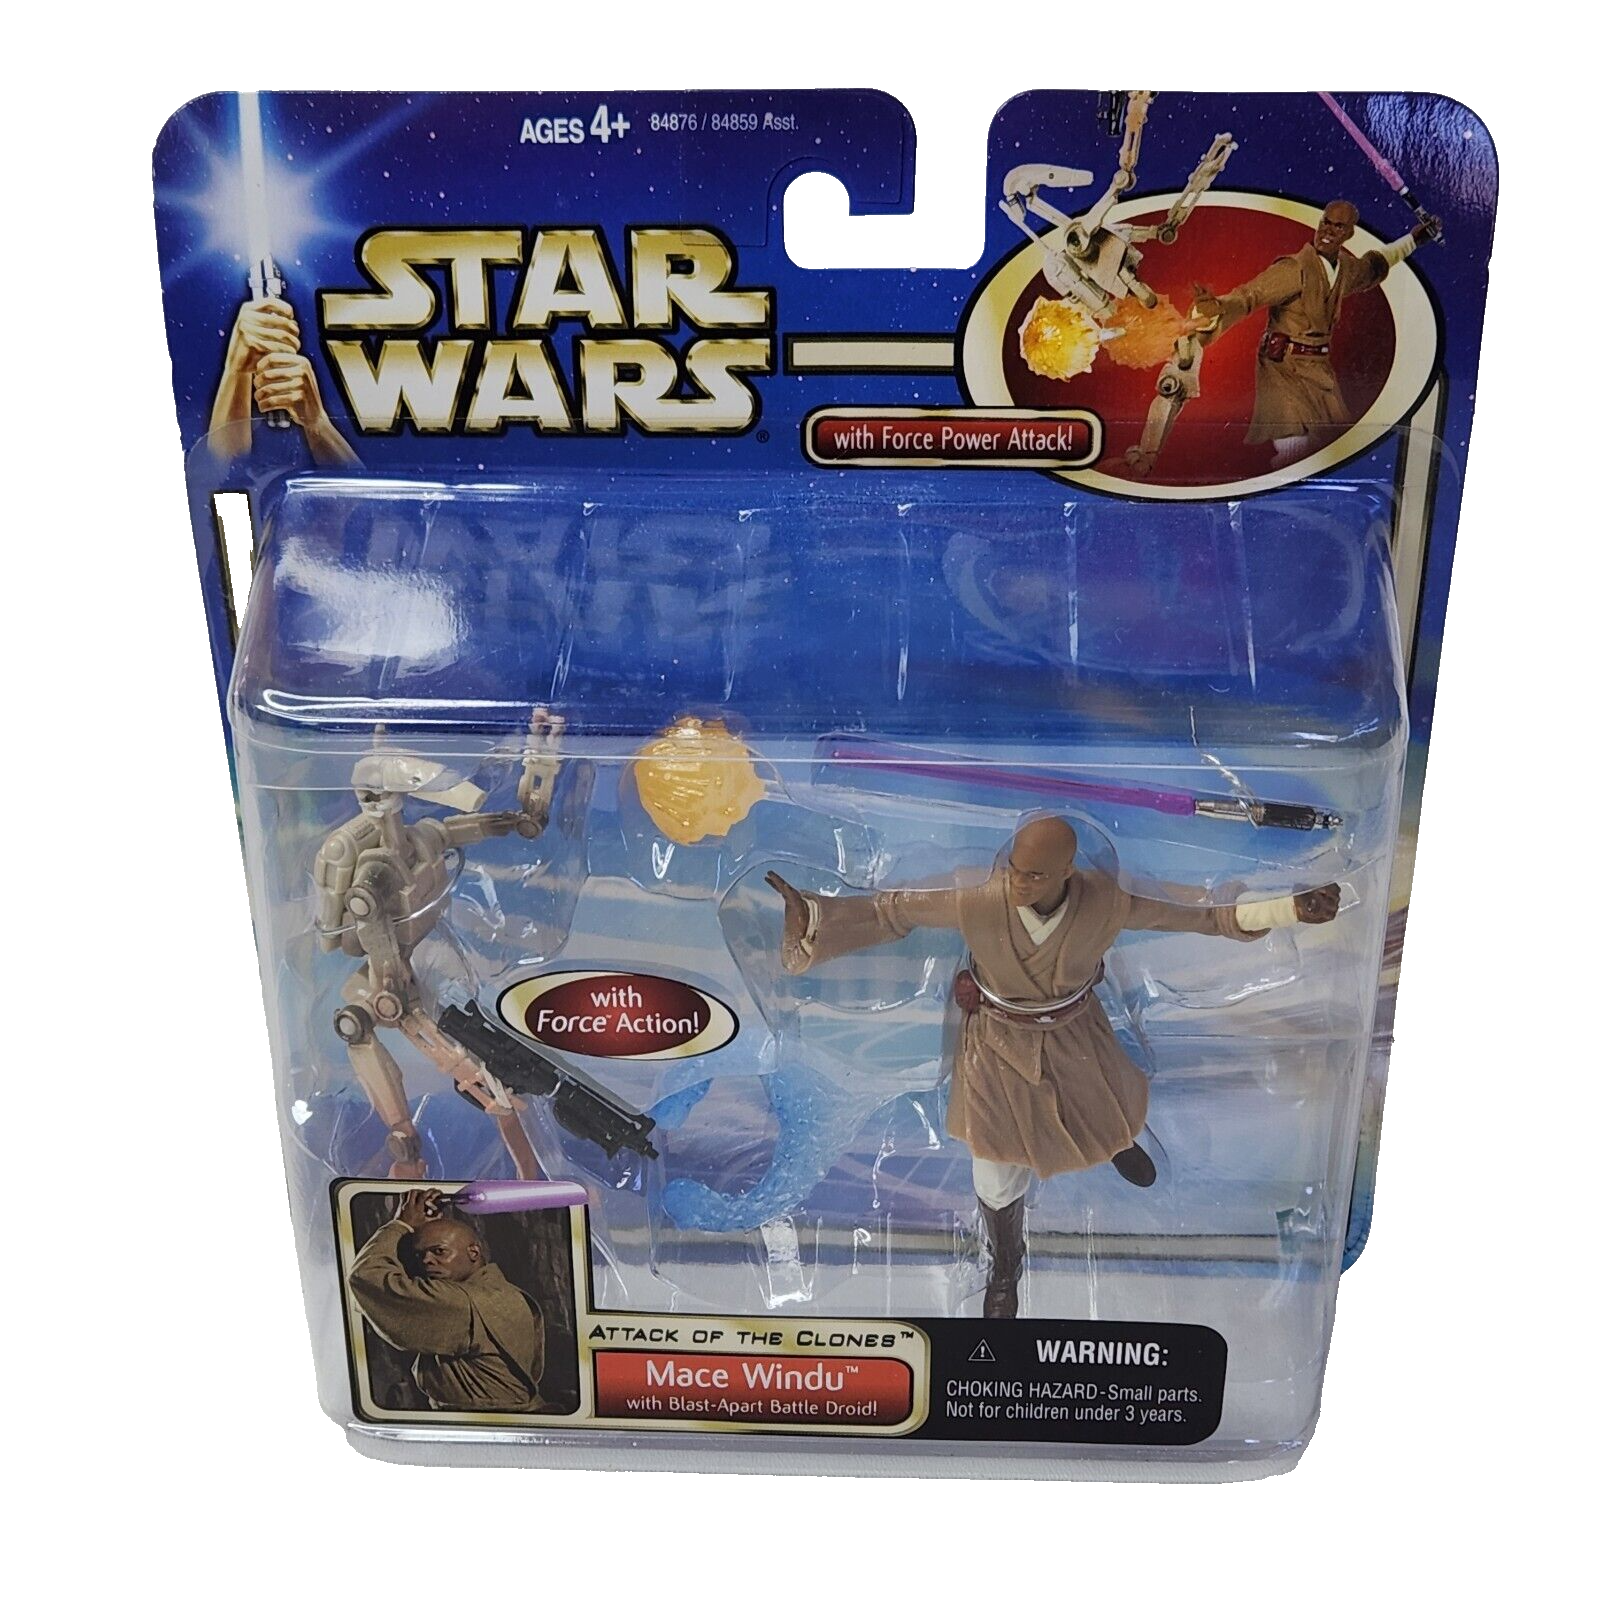 Primary image for 2002 HASBRO STAR WARS ATTACK OF THE CLONES MACE WINDU ACTION FIGURE # 84876